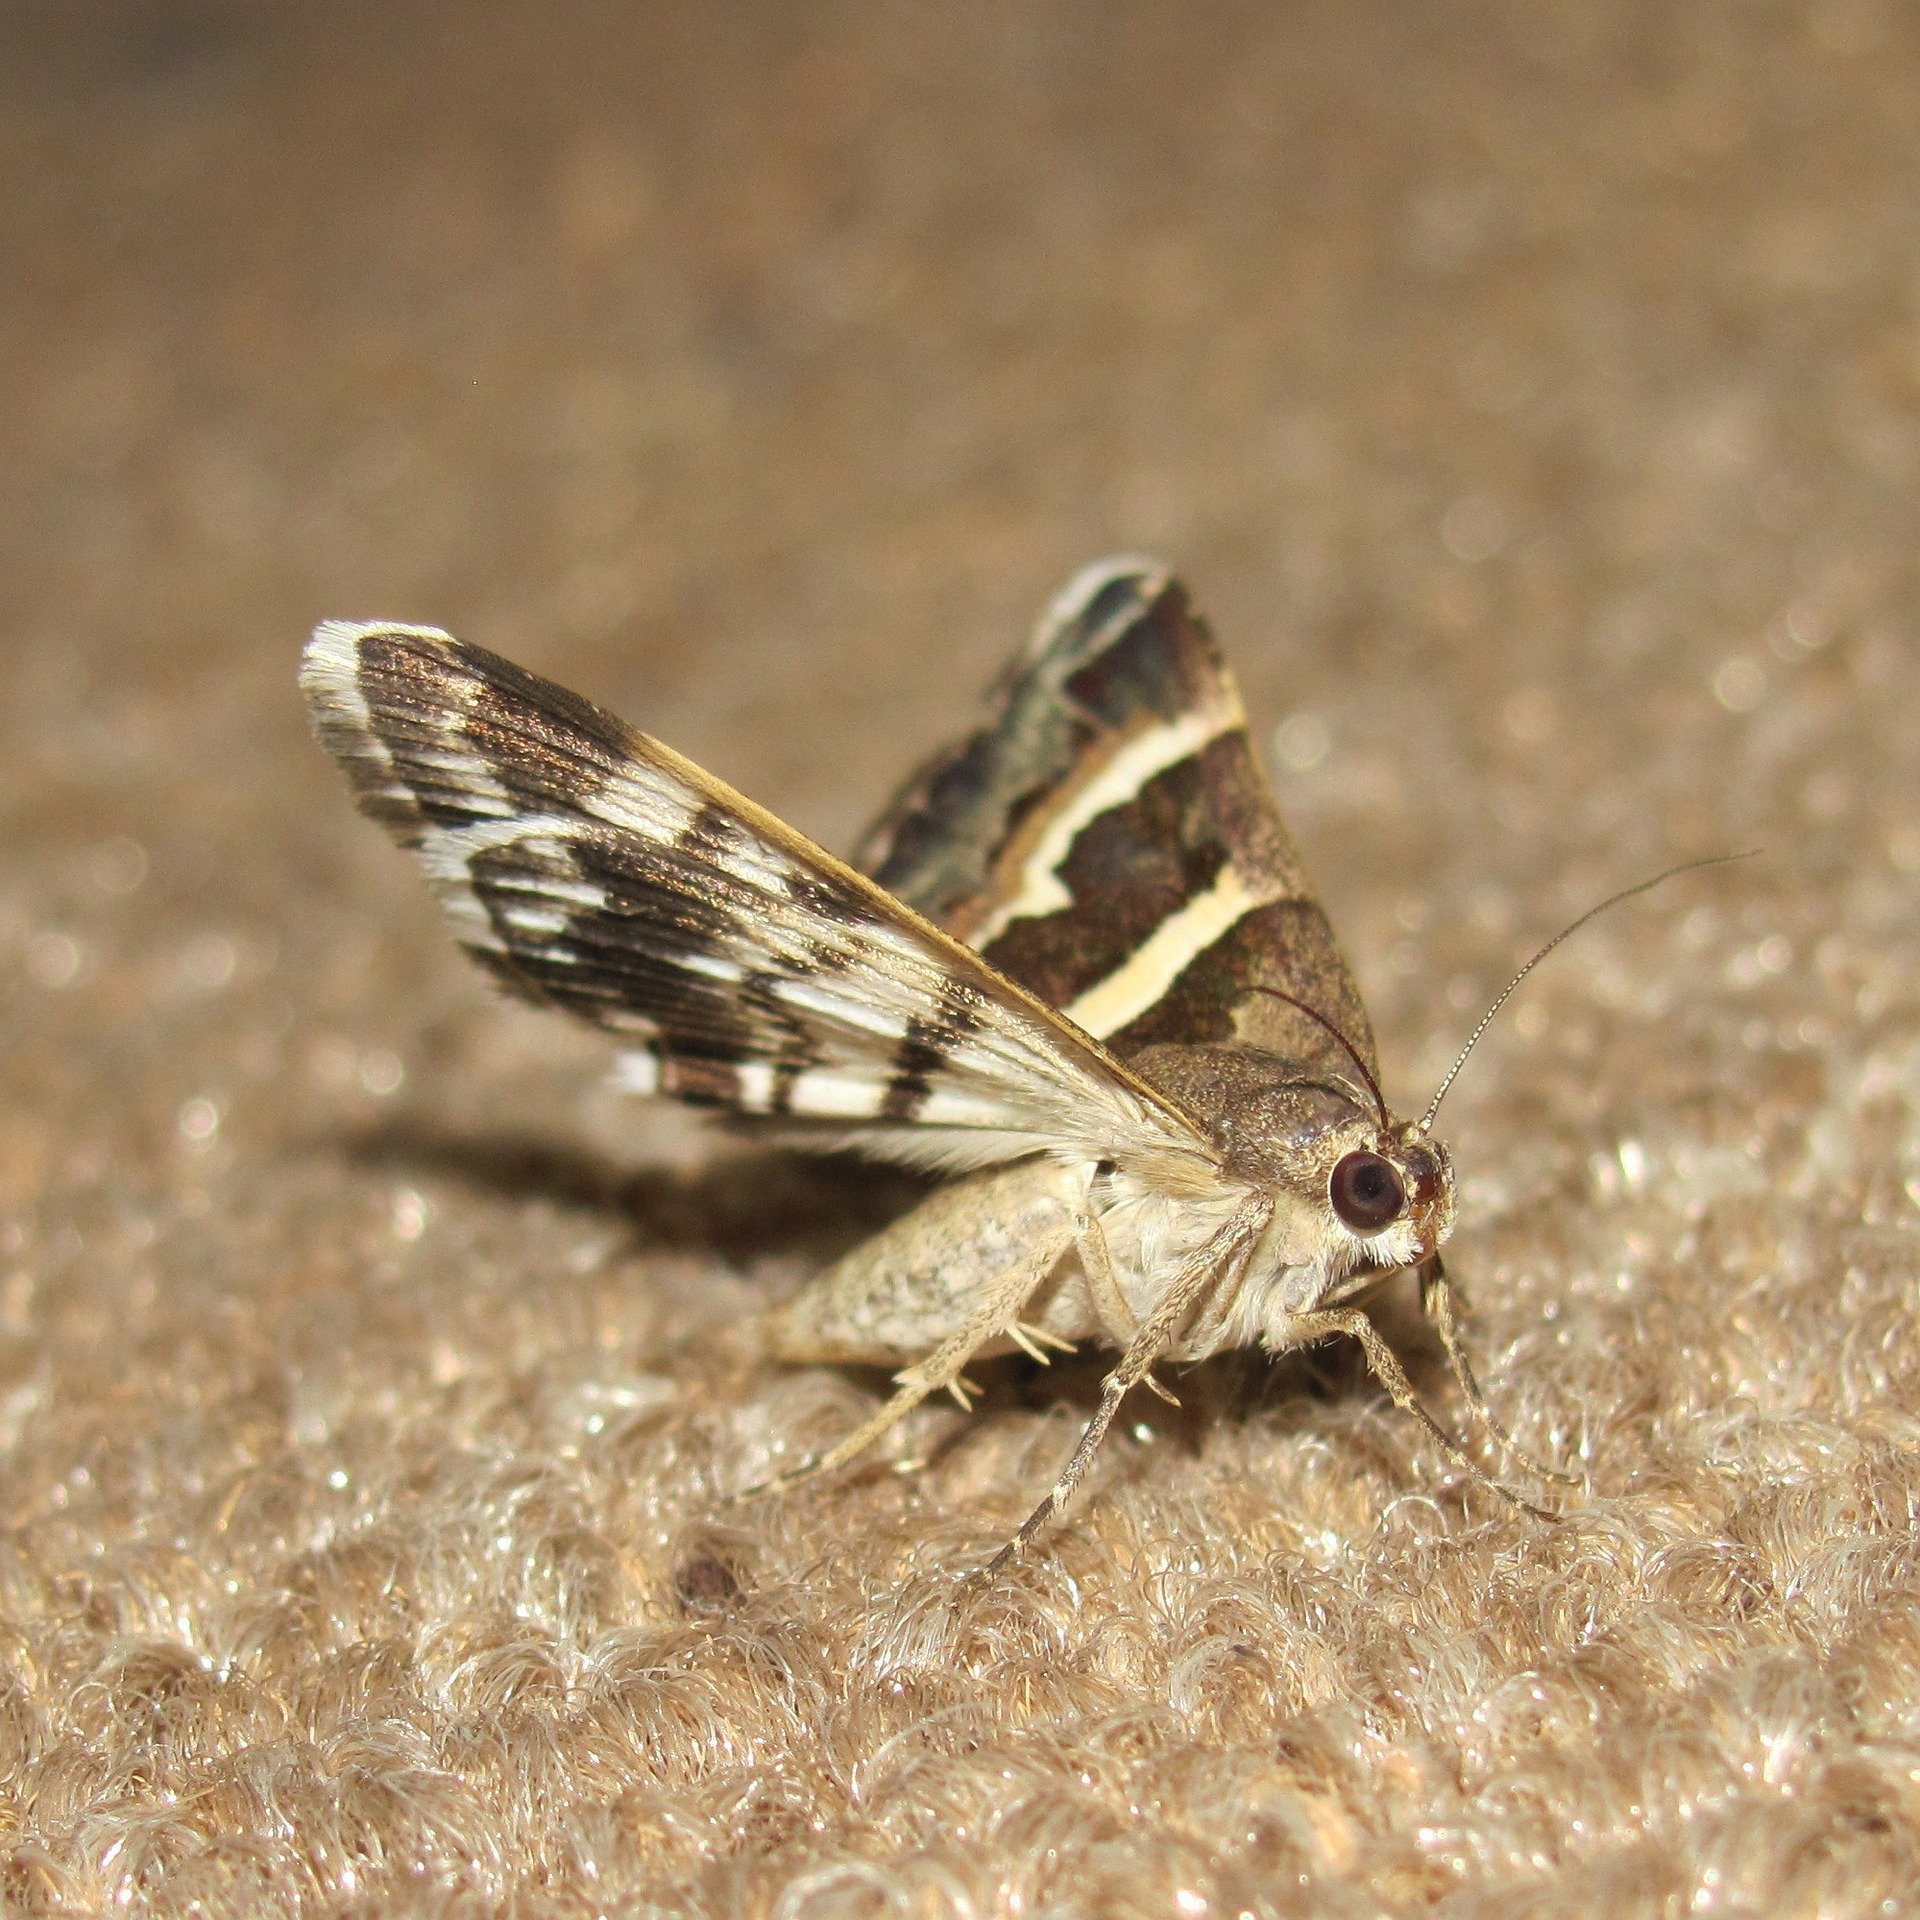 Blog - What To Do About Moths In Your Houston Closet